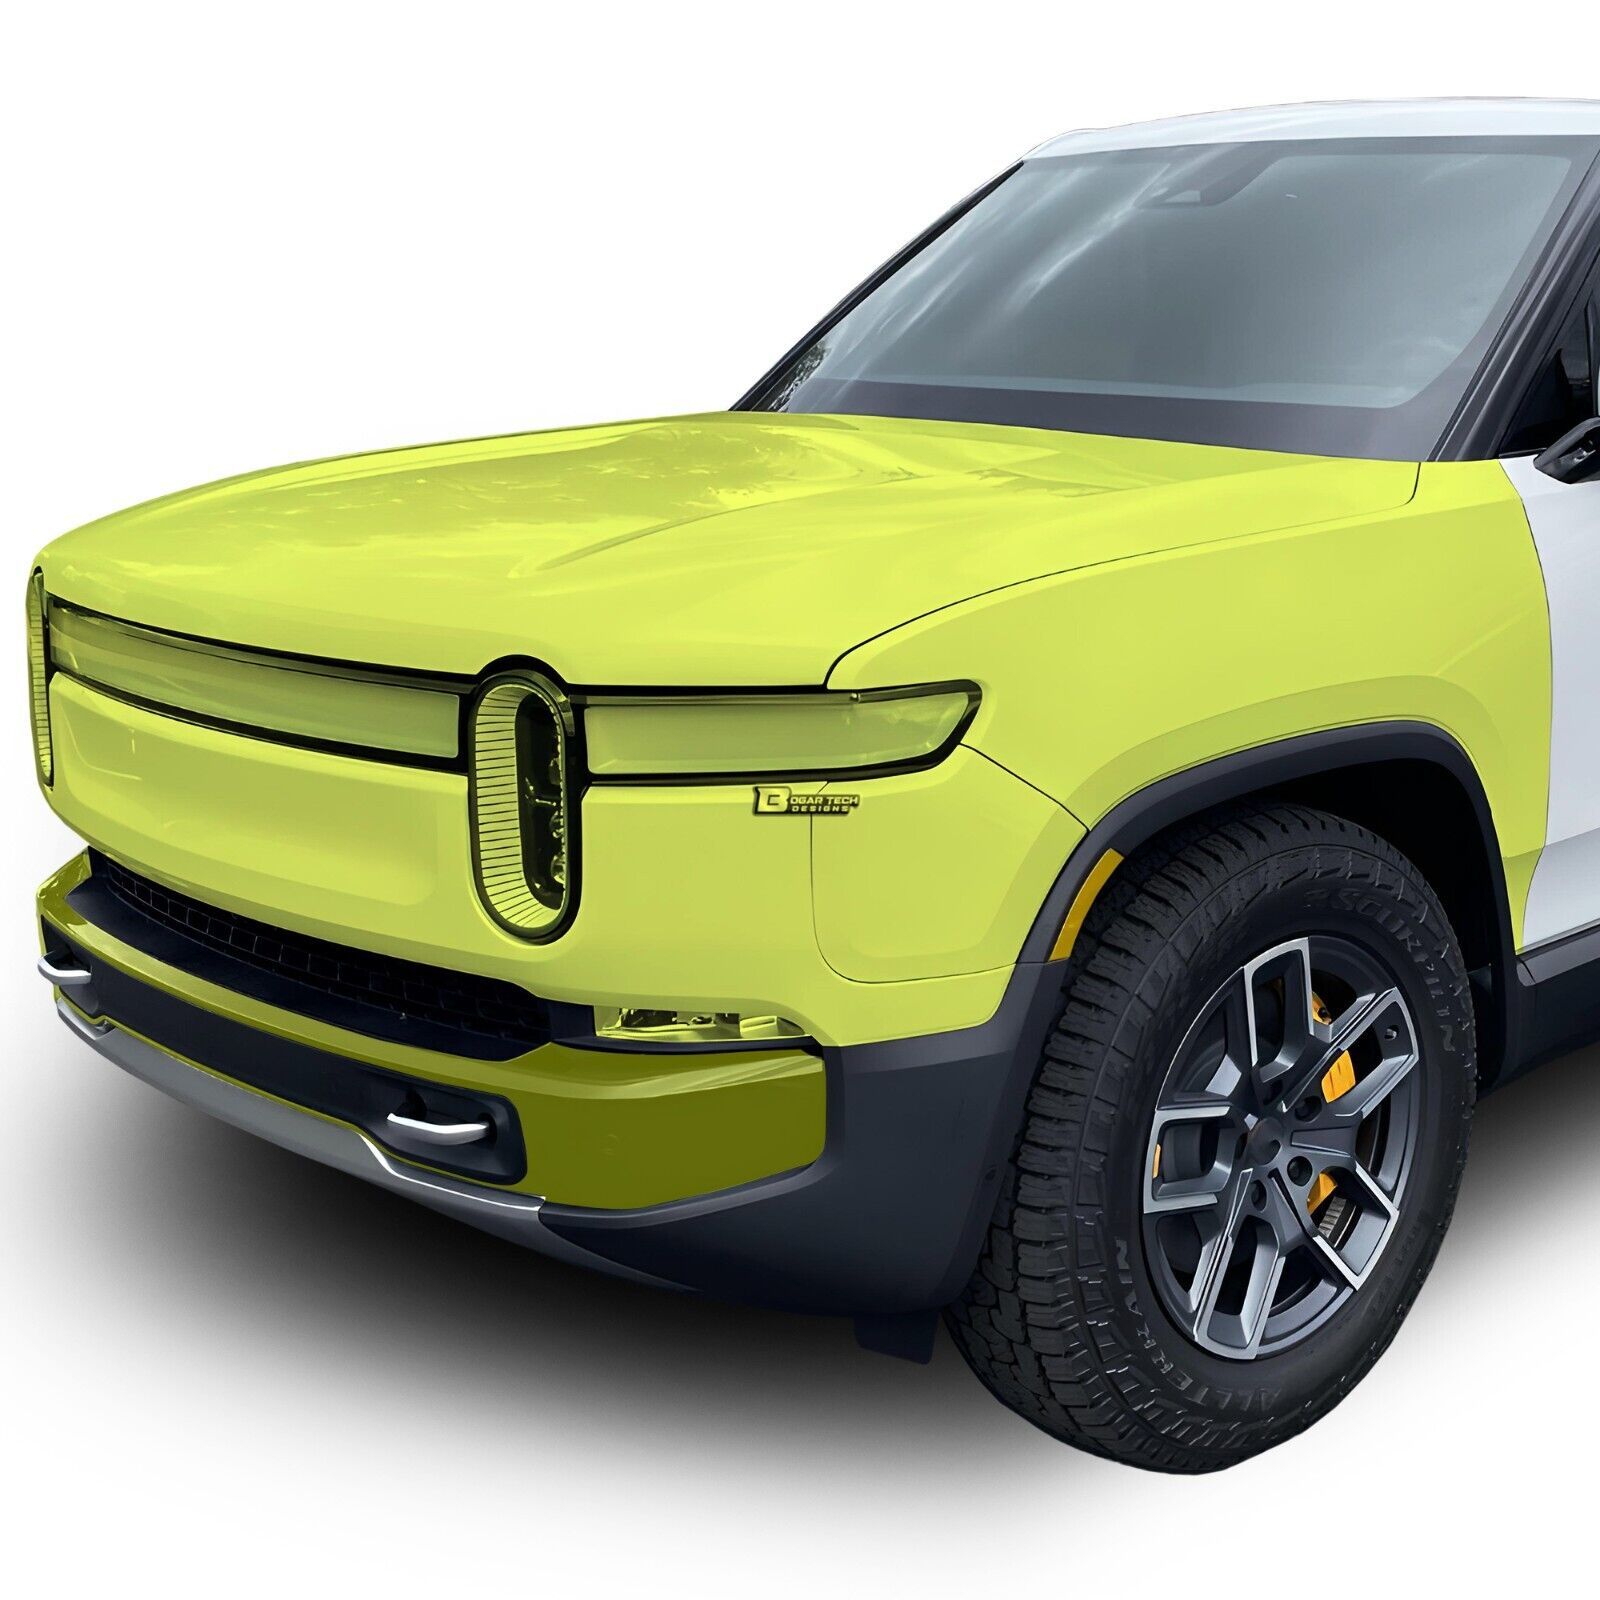 Primary image for Pre Cut Paint Protection Film Clear Bra Precut PPF Kit for Rivian R1T R1S